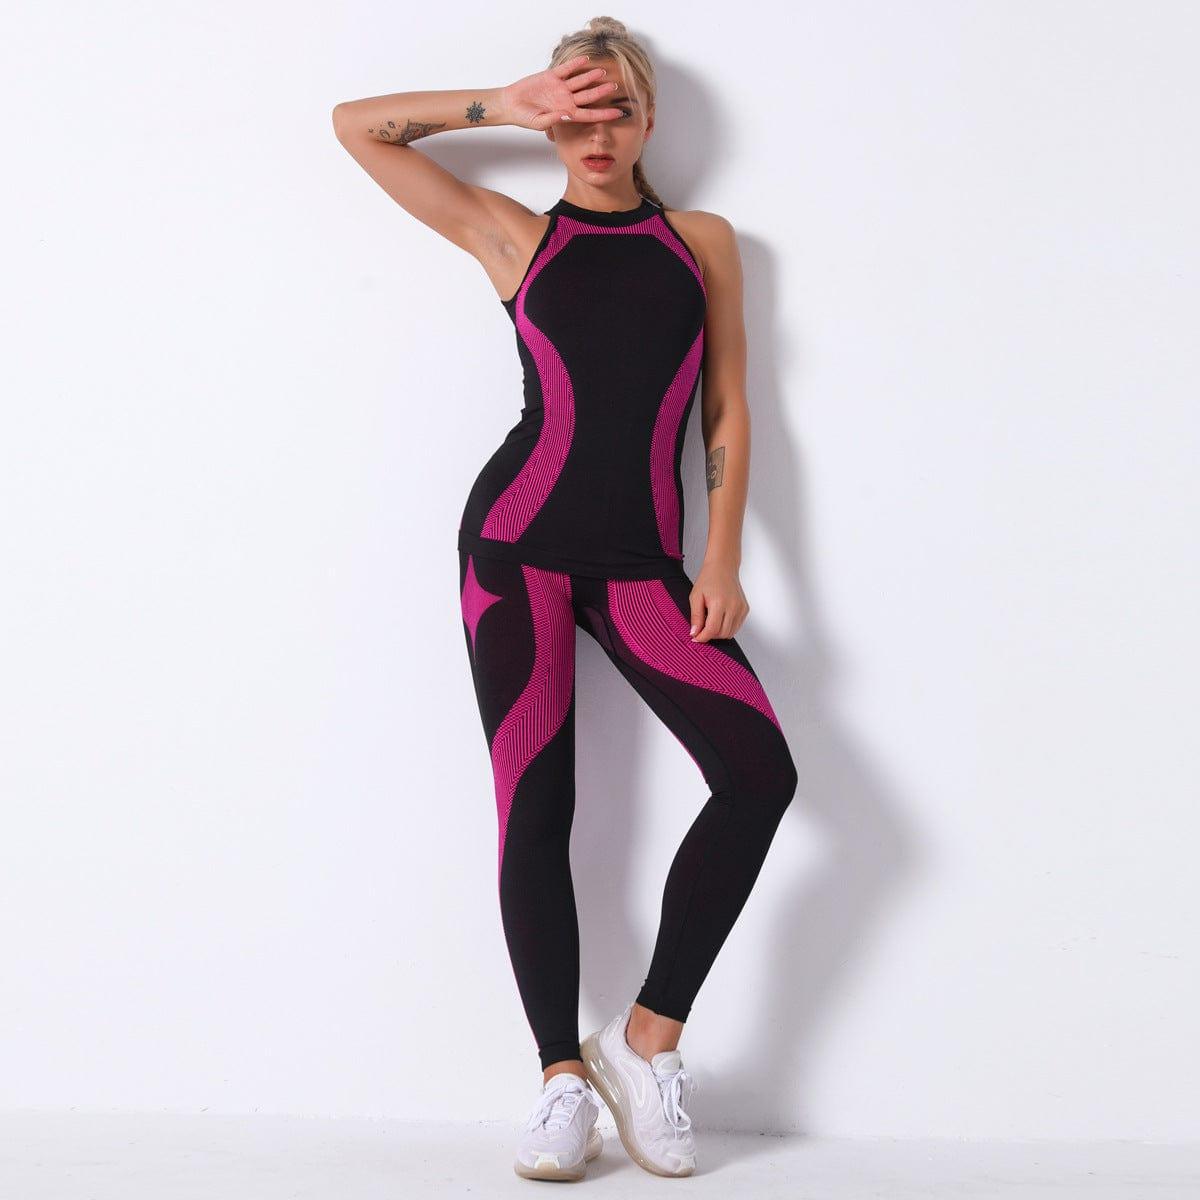 Compressed Sports Suit Female Large Size Gym Jumpsuit - For Women USA